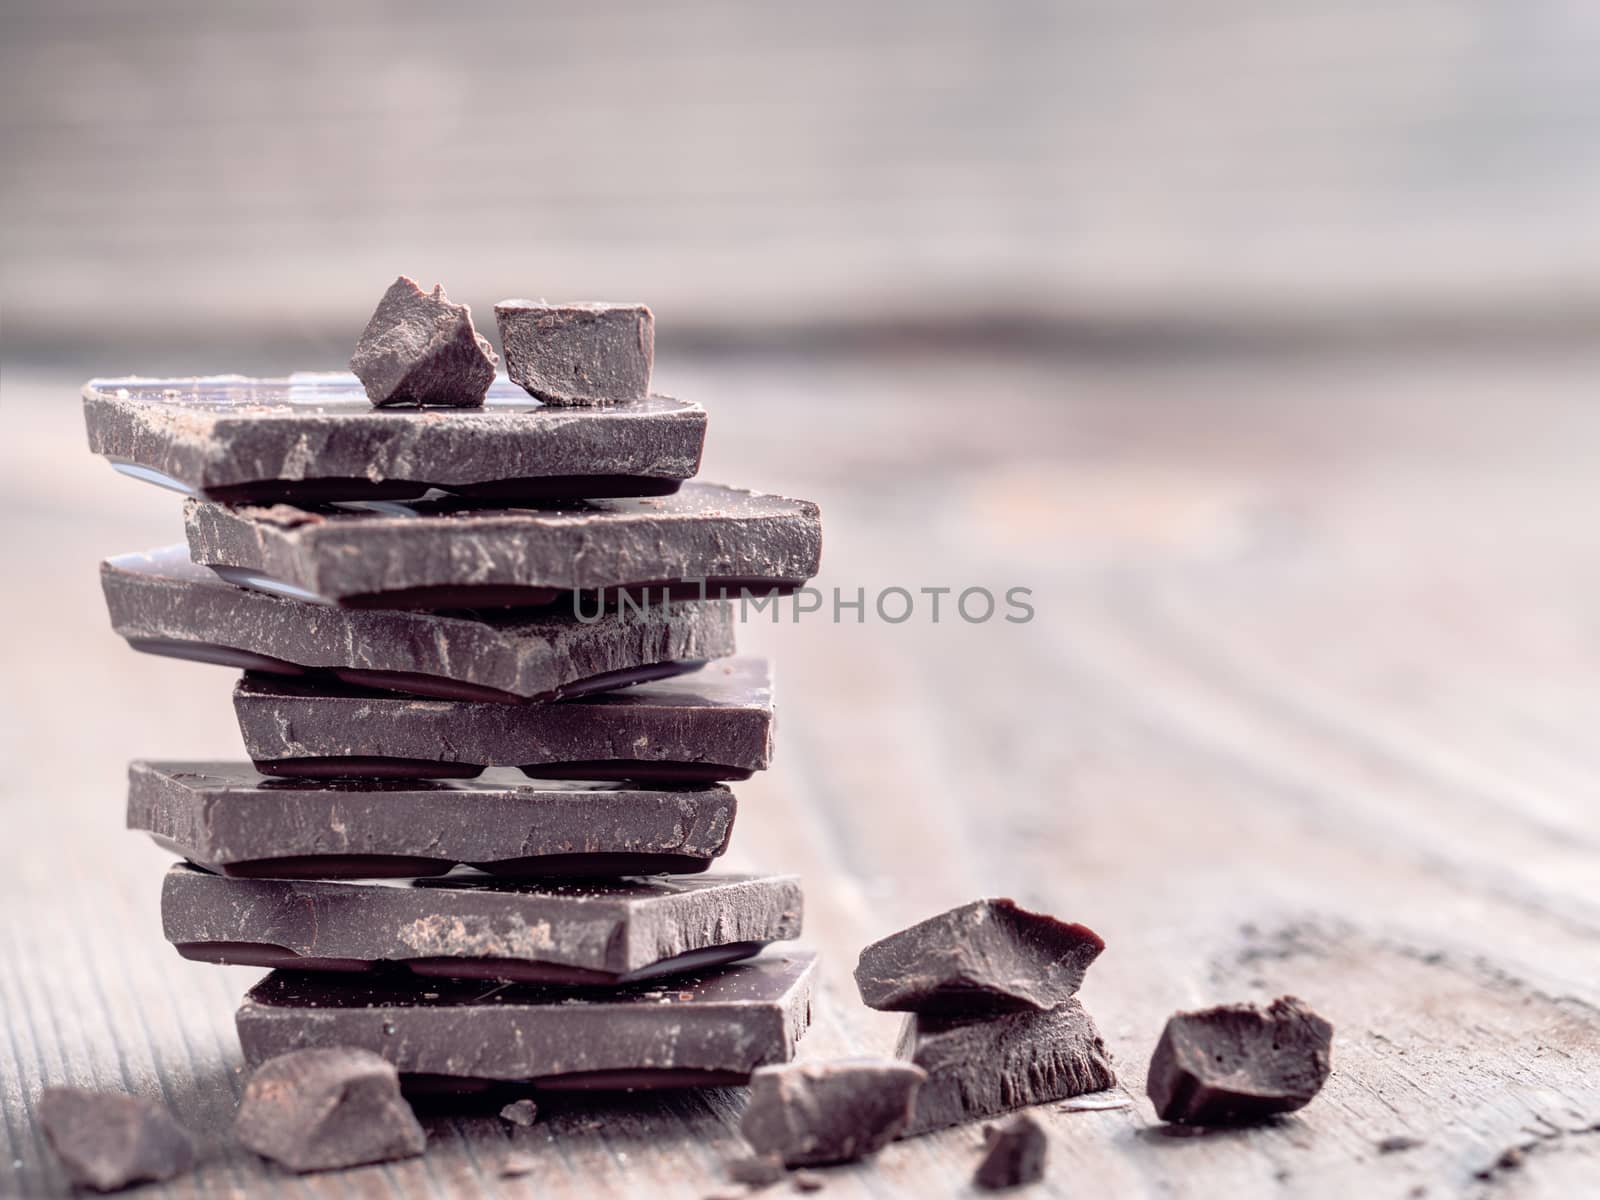 Stack of dark chocolate with copy space. Chocolate with chunks and crumbs on wooden background.